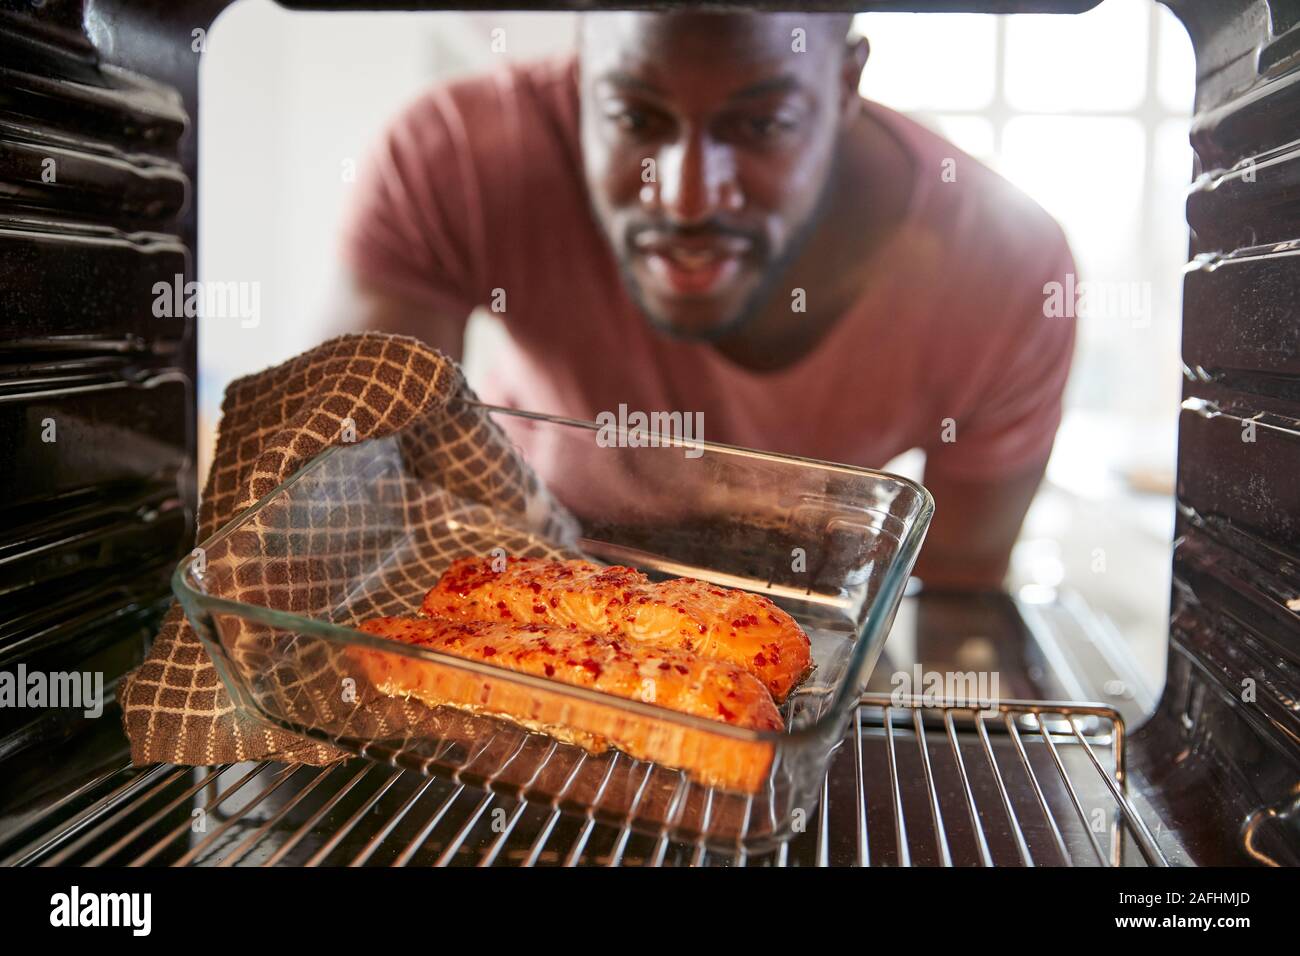 View Looking Out From Inside Oven As Man Cooks Oven Baked Salmon Stock Photo